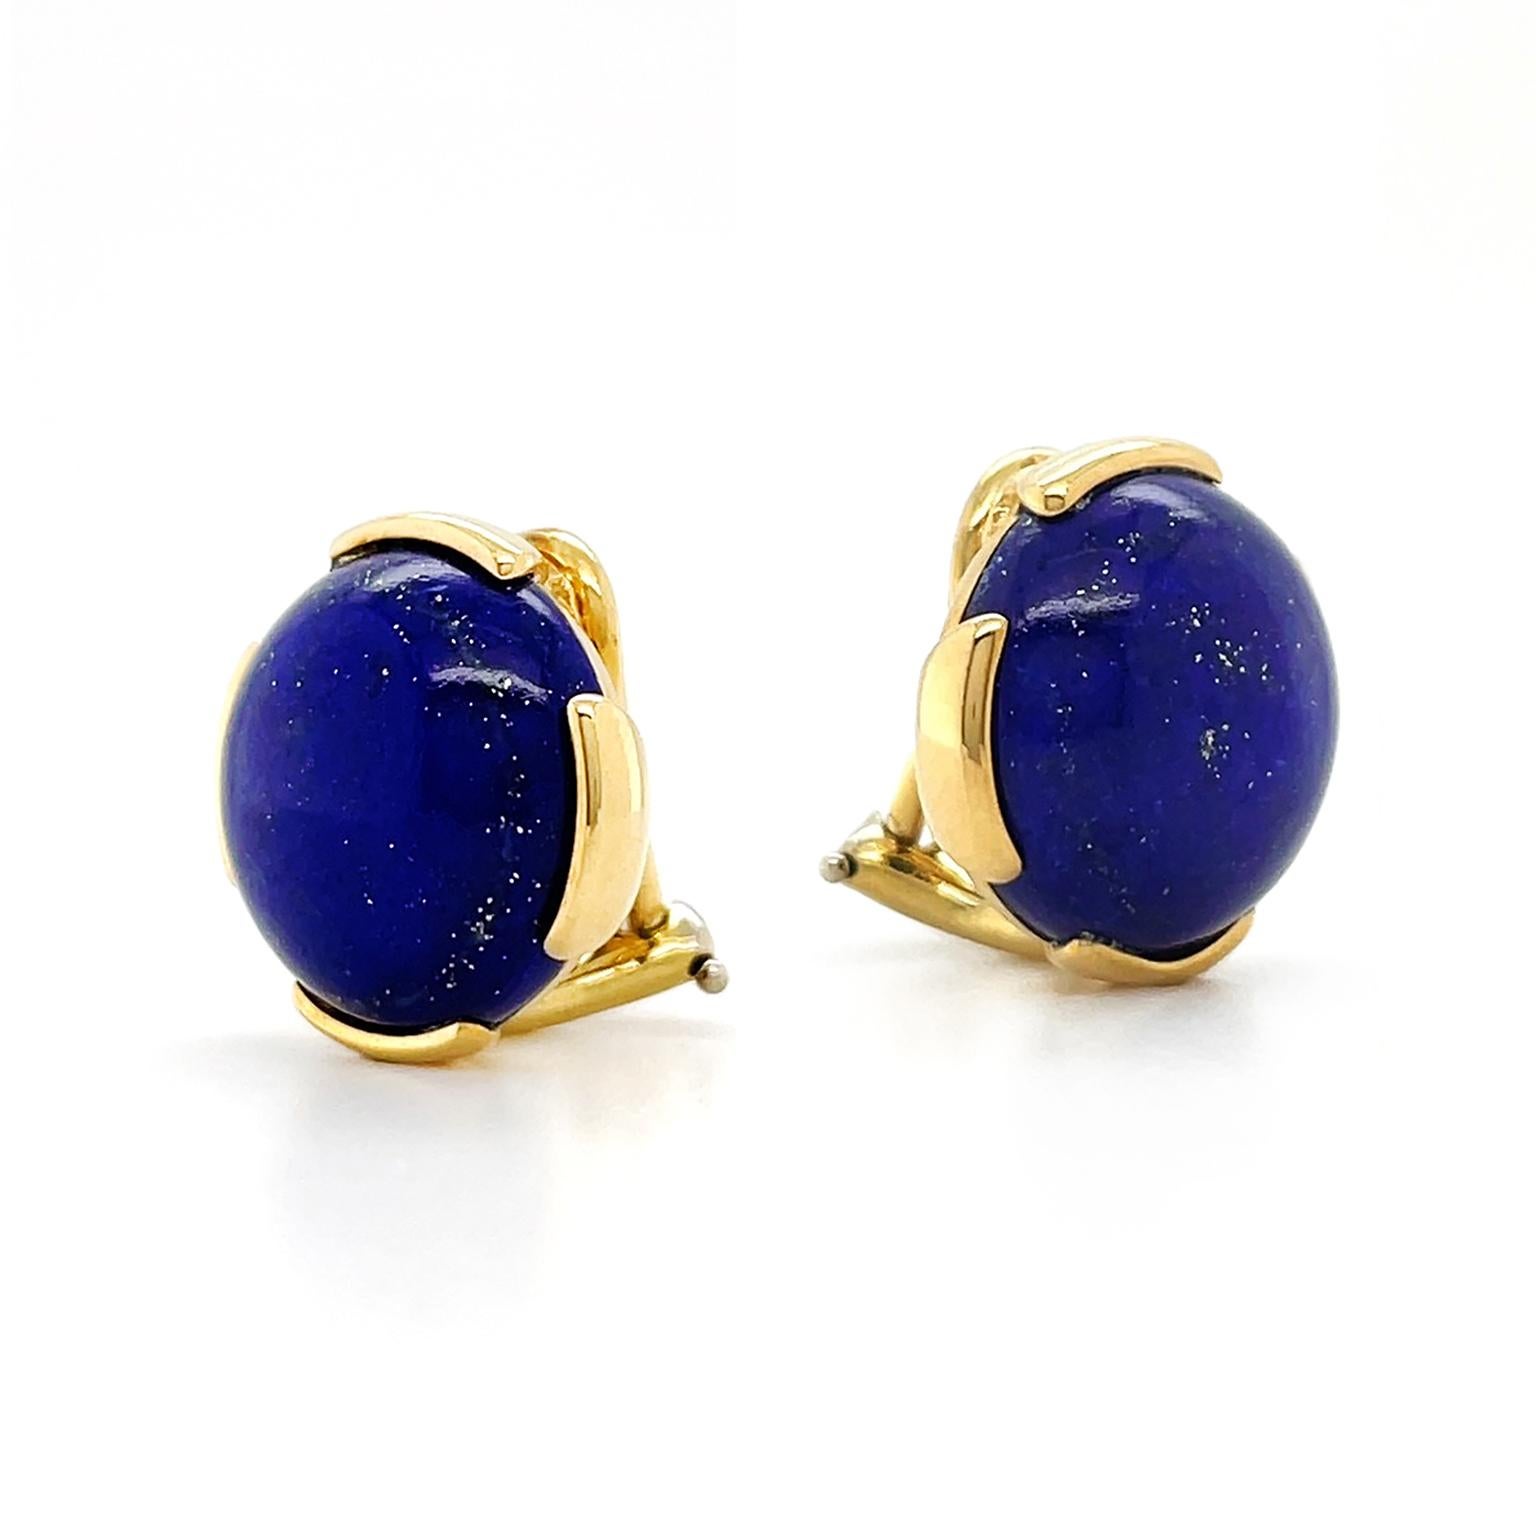 The profuse blue violet of lapis lazuli is presented in round cabochons. 18k yellow gold sets the gem with four round edges visible, which bring out the golden flecks that glitter within the lapis lazuli. The total weight of the gem is 21.28 carats.